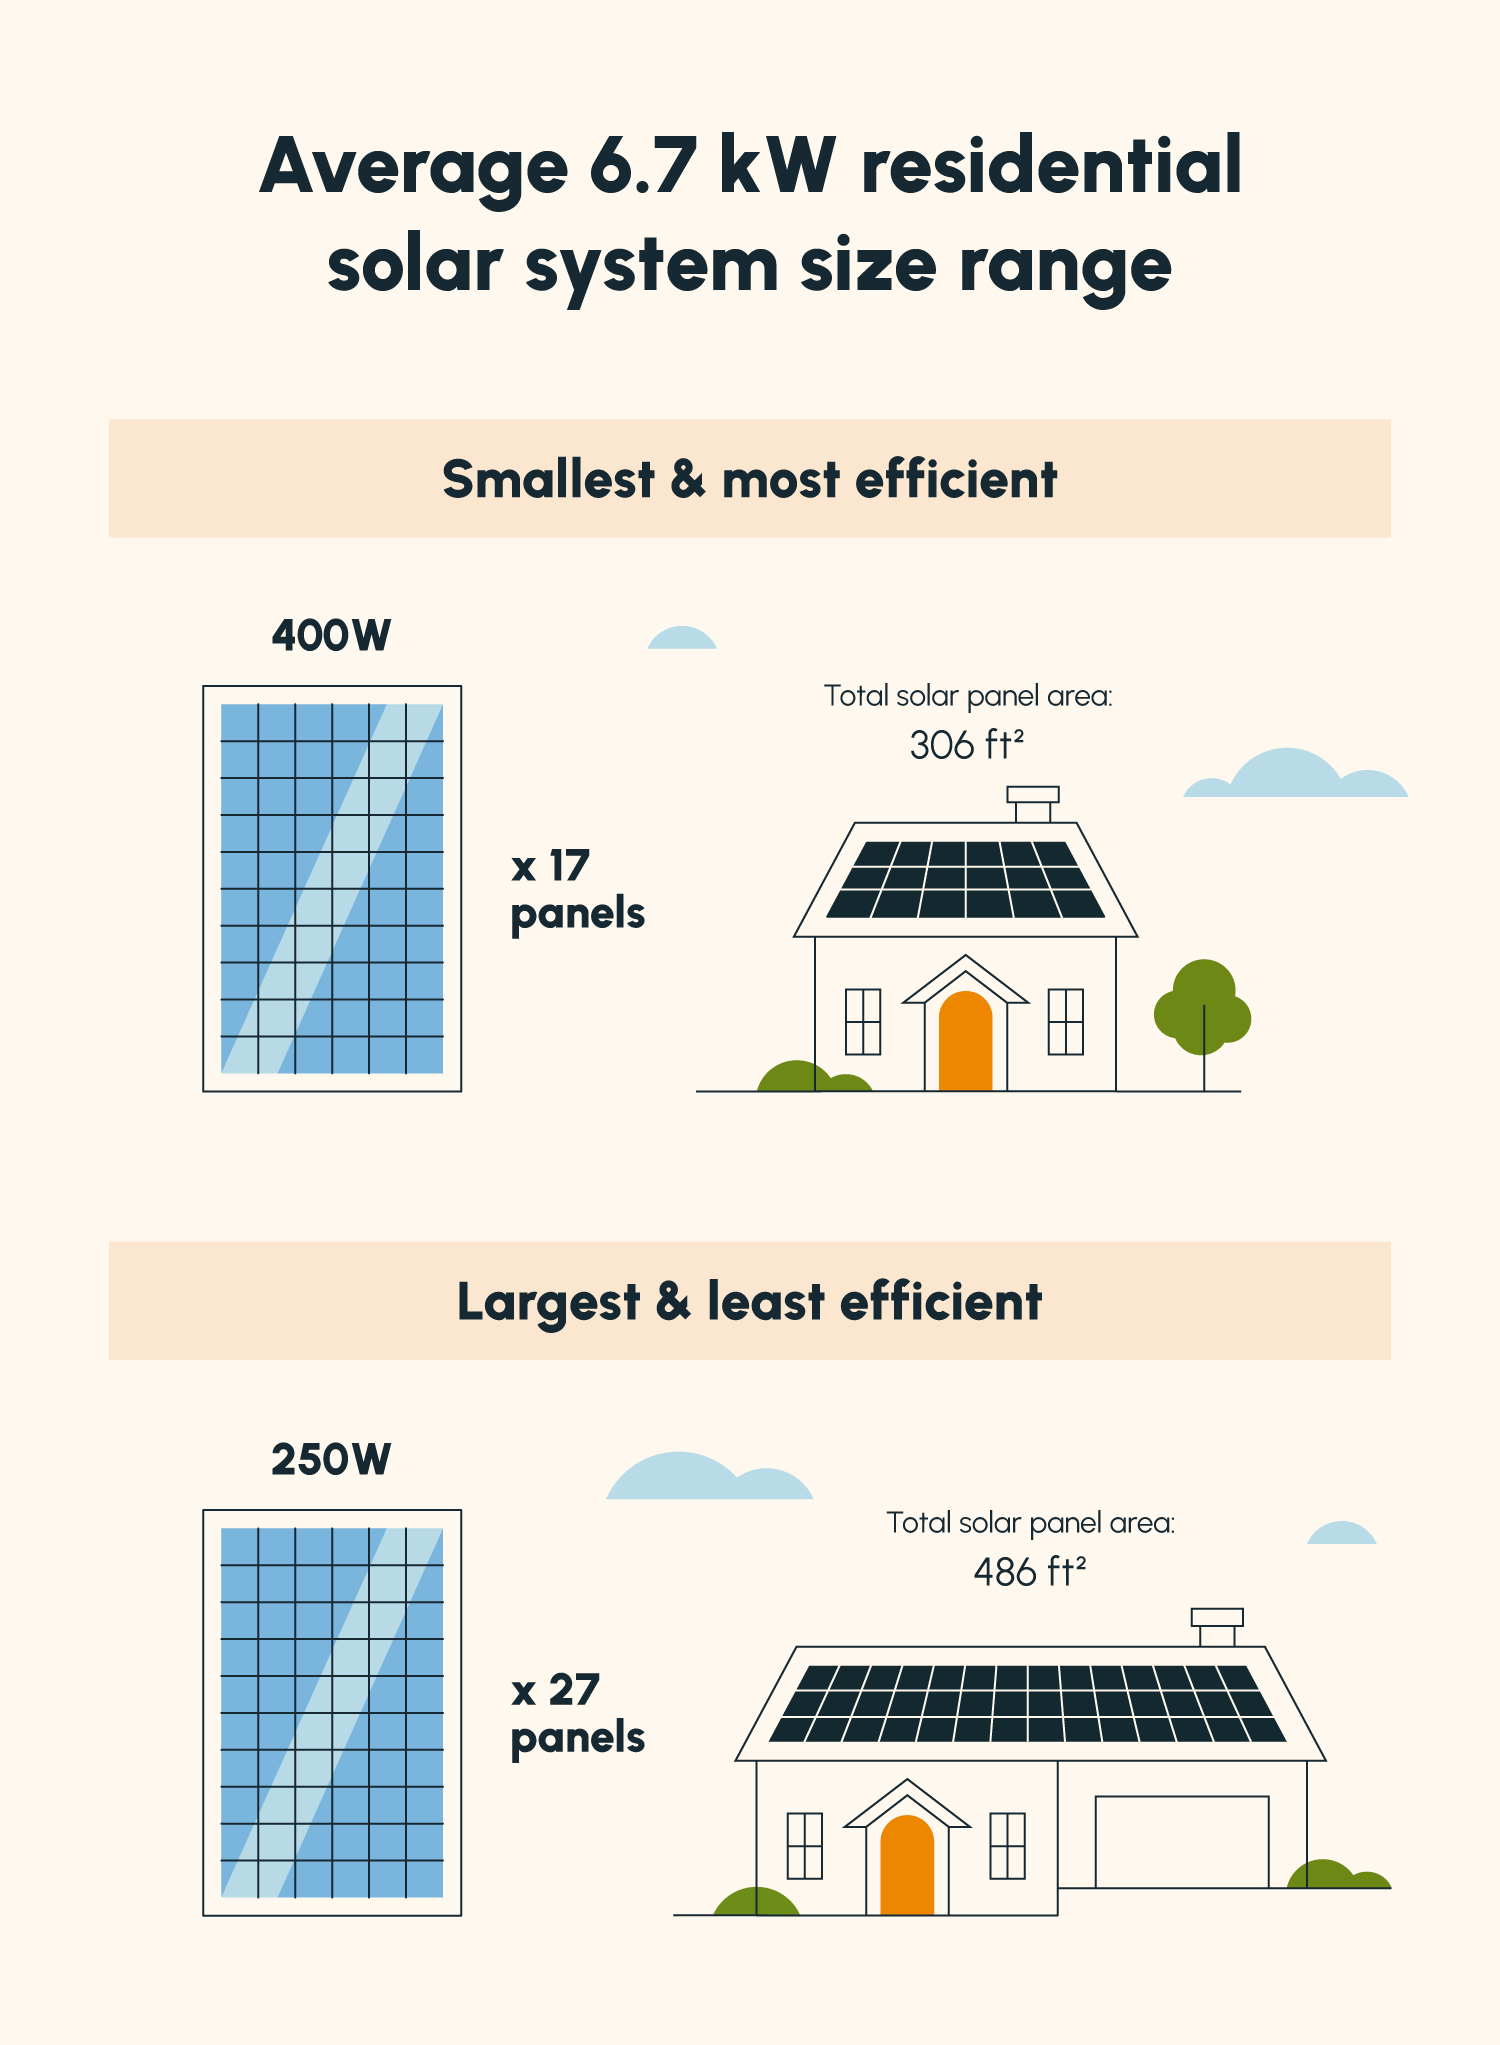 Illustrations of homes with solar panels communicating the size range of a 6.7 kW residential solar system